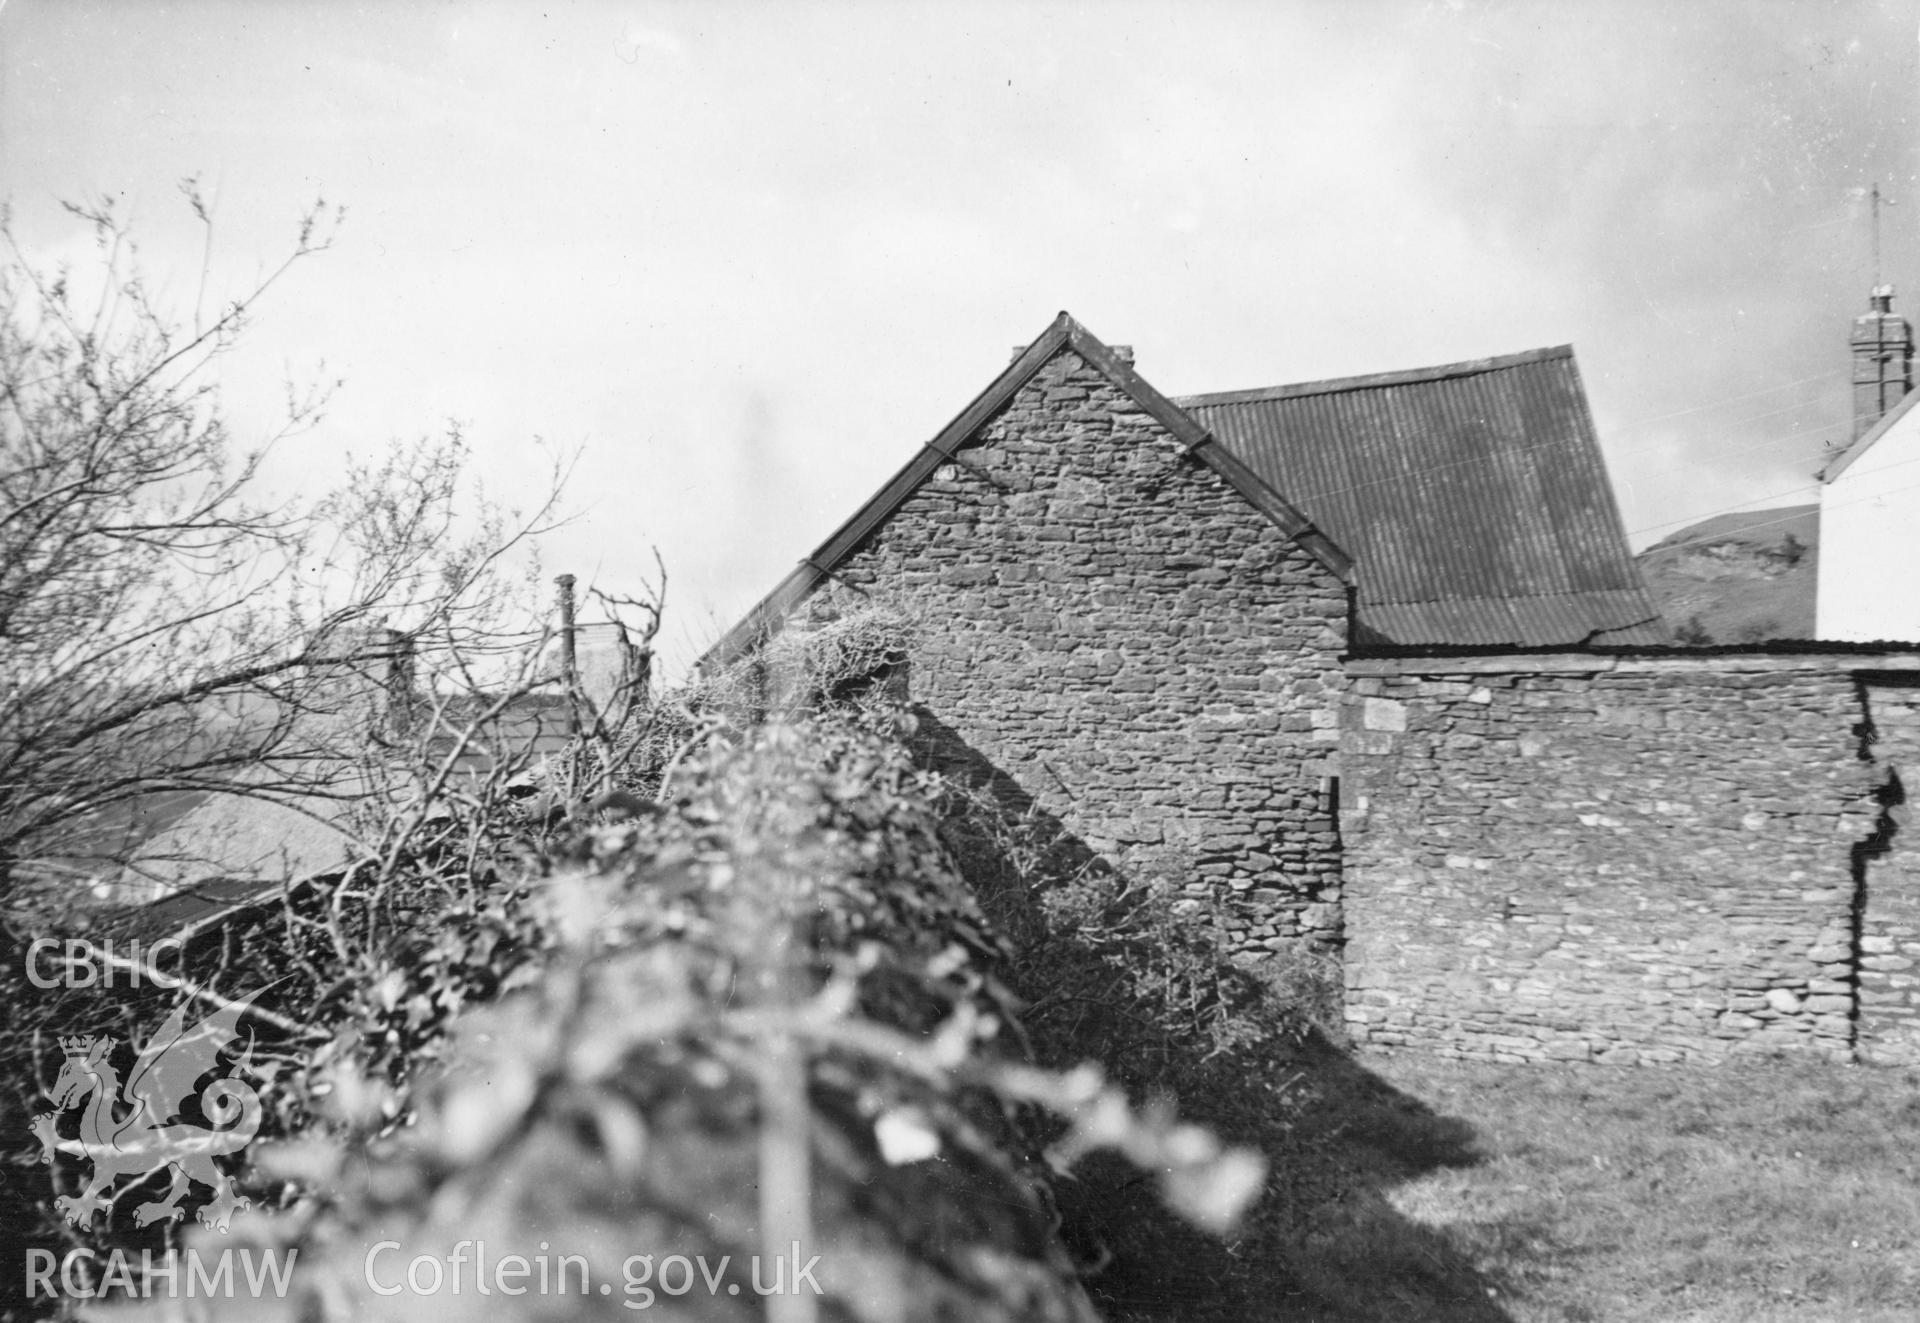 View of rear of a house near to Llantrisant Castle.